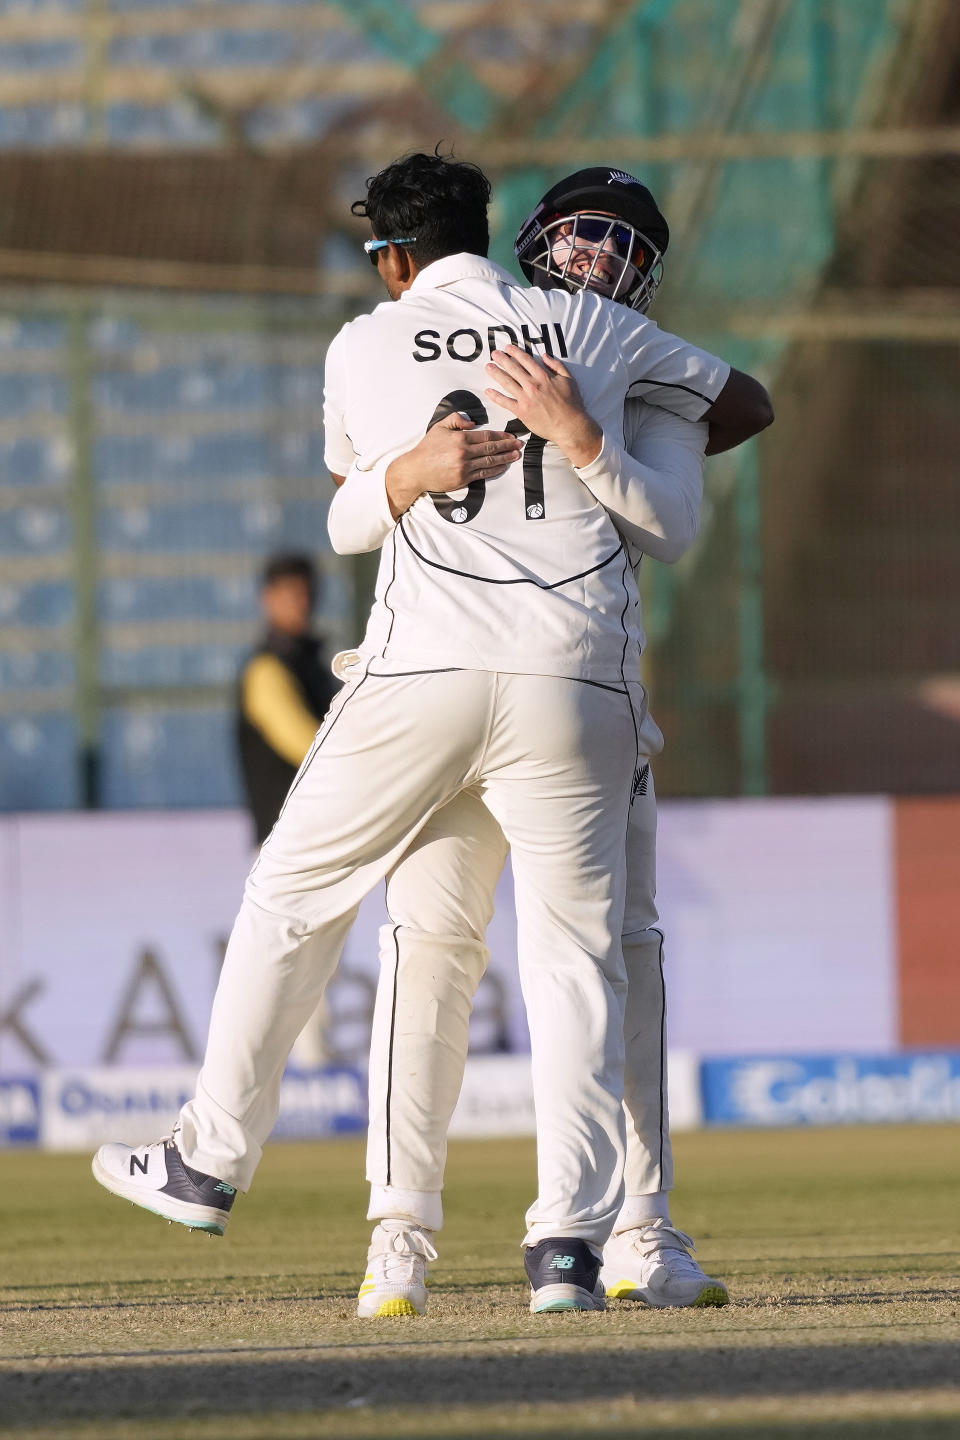 New Zealand's Ish Sodhi celebrates with teammate after taking the wicket of Pakistan's Shan Masood during the fourth day of first test cricket match between Pakistan and New Zealand, in Karachi, Pakistan, Thursday, Dec. 29, 2022. (AP Photo/Fareed Khan)